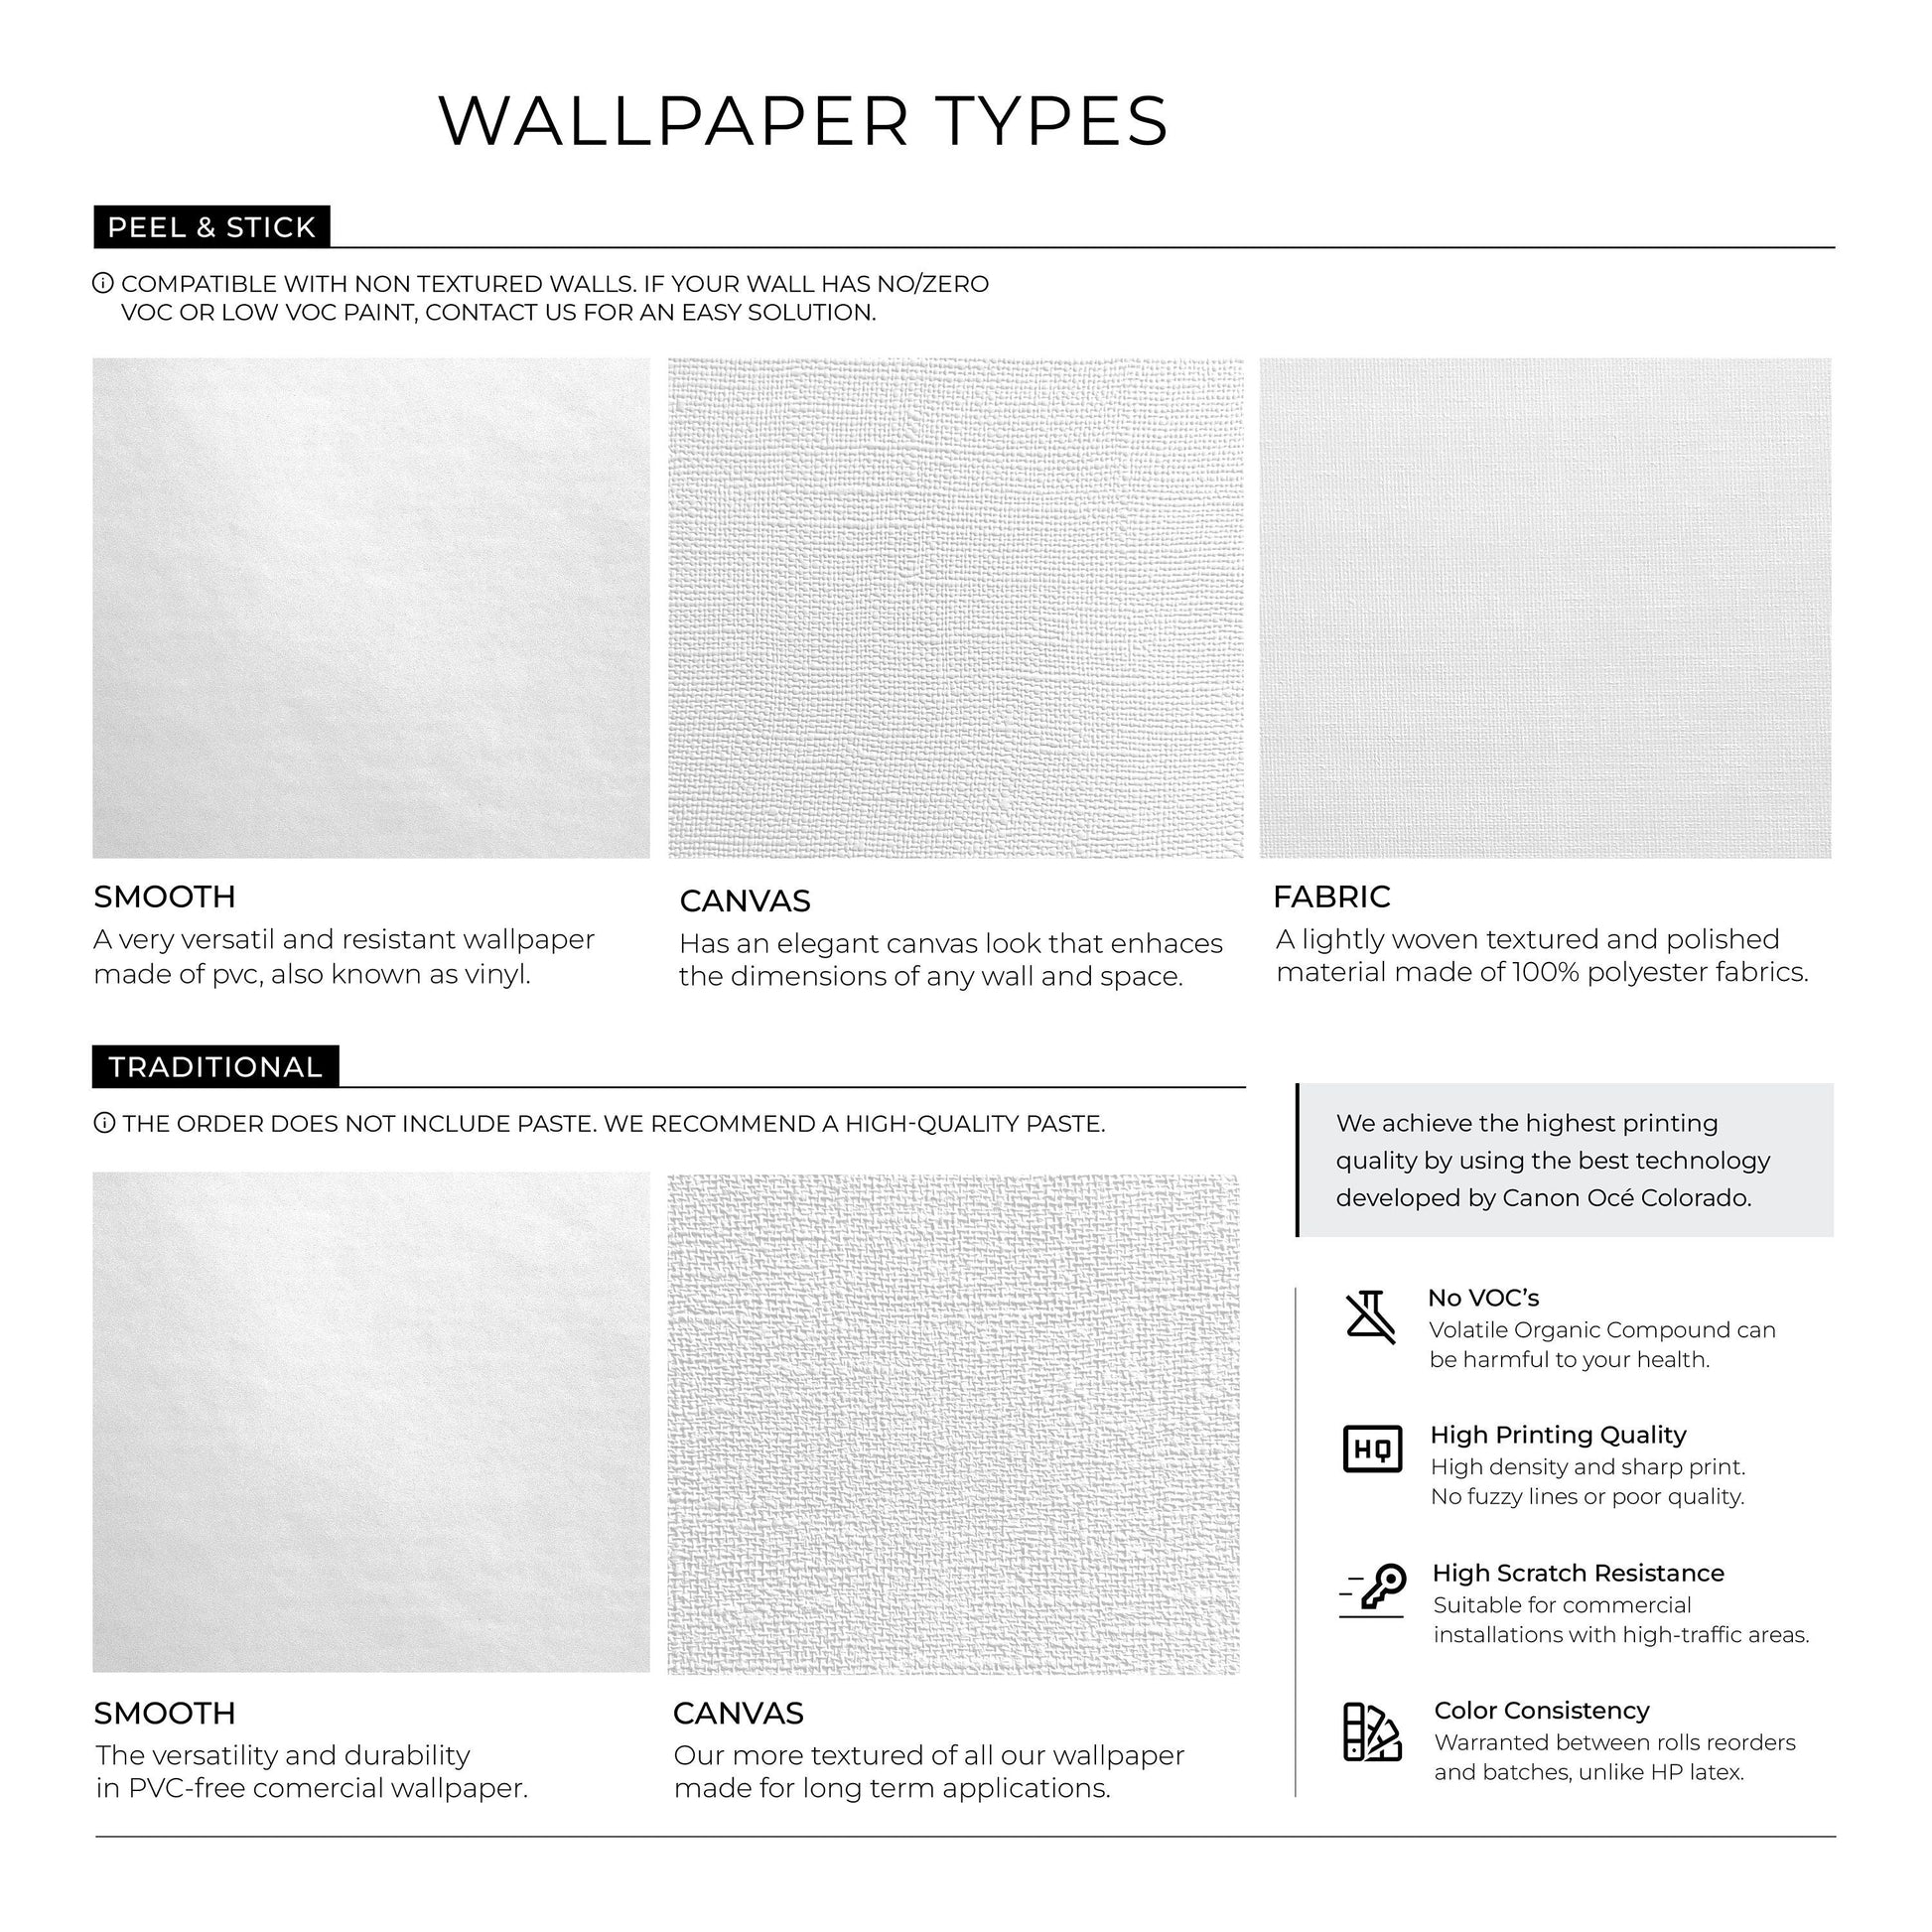 Removable Wallpaper Wall Temporary Wallpaper Nursery Wallpaper Wall Decor Wall Paper Removable Peel and Stick Wallpaper - C254